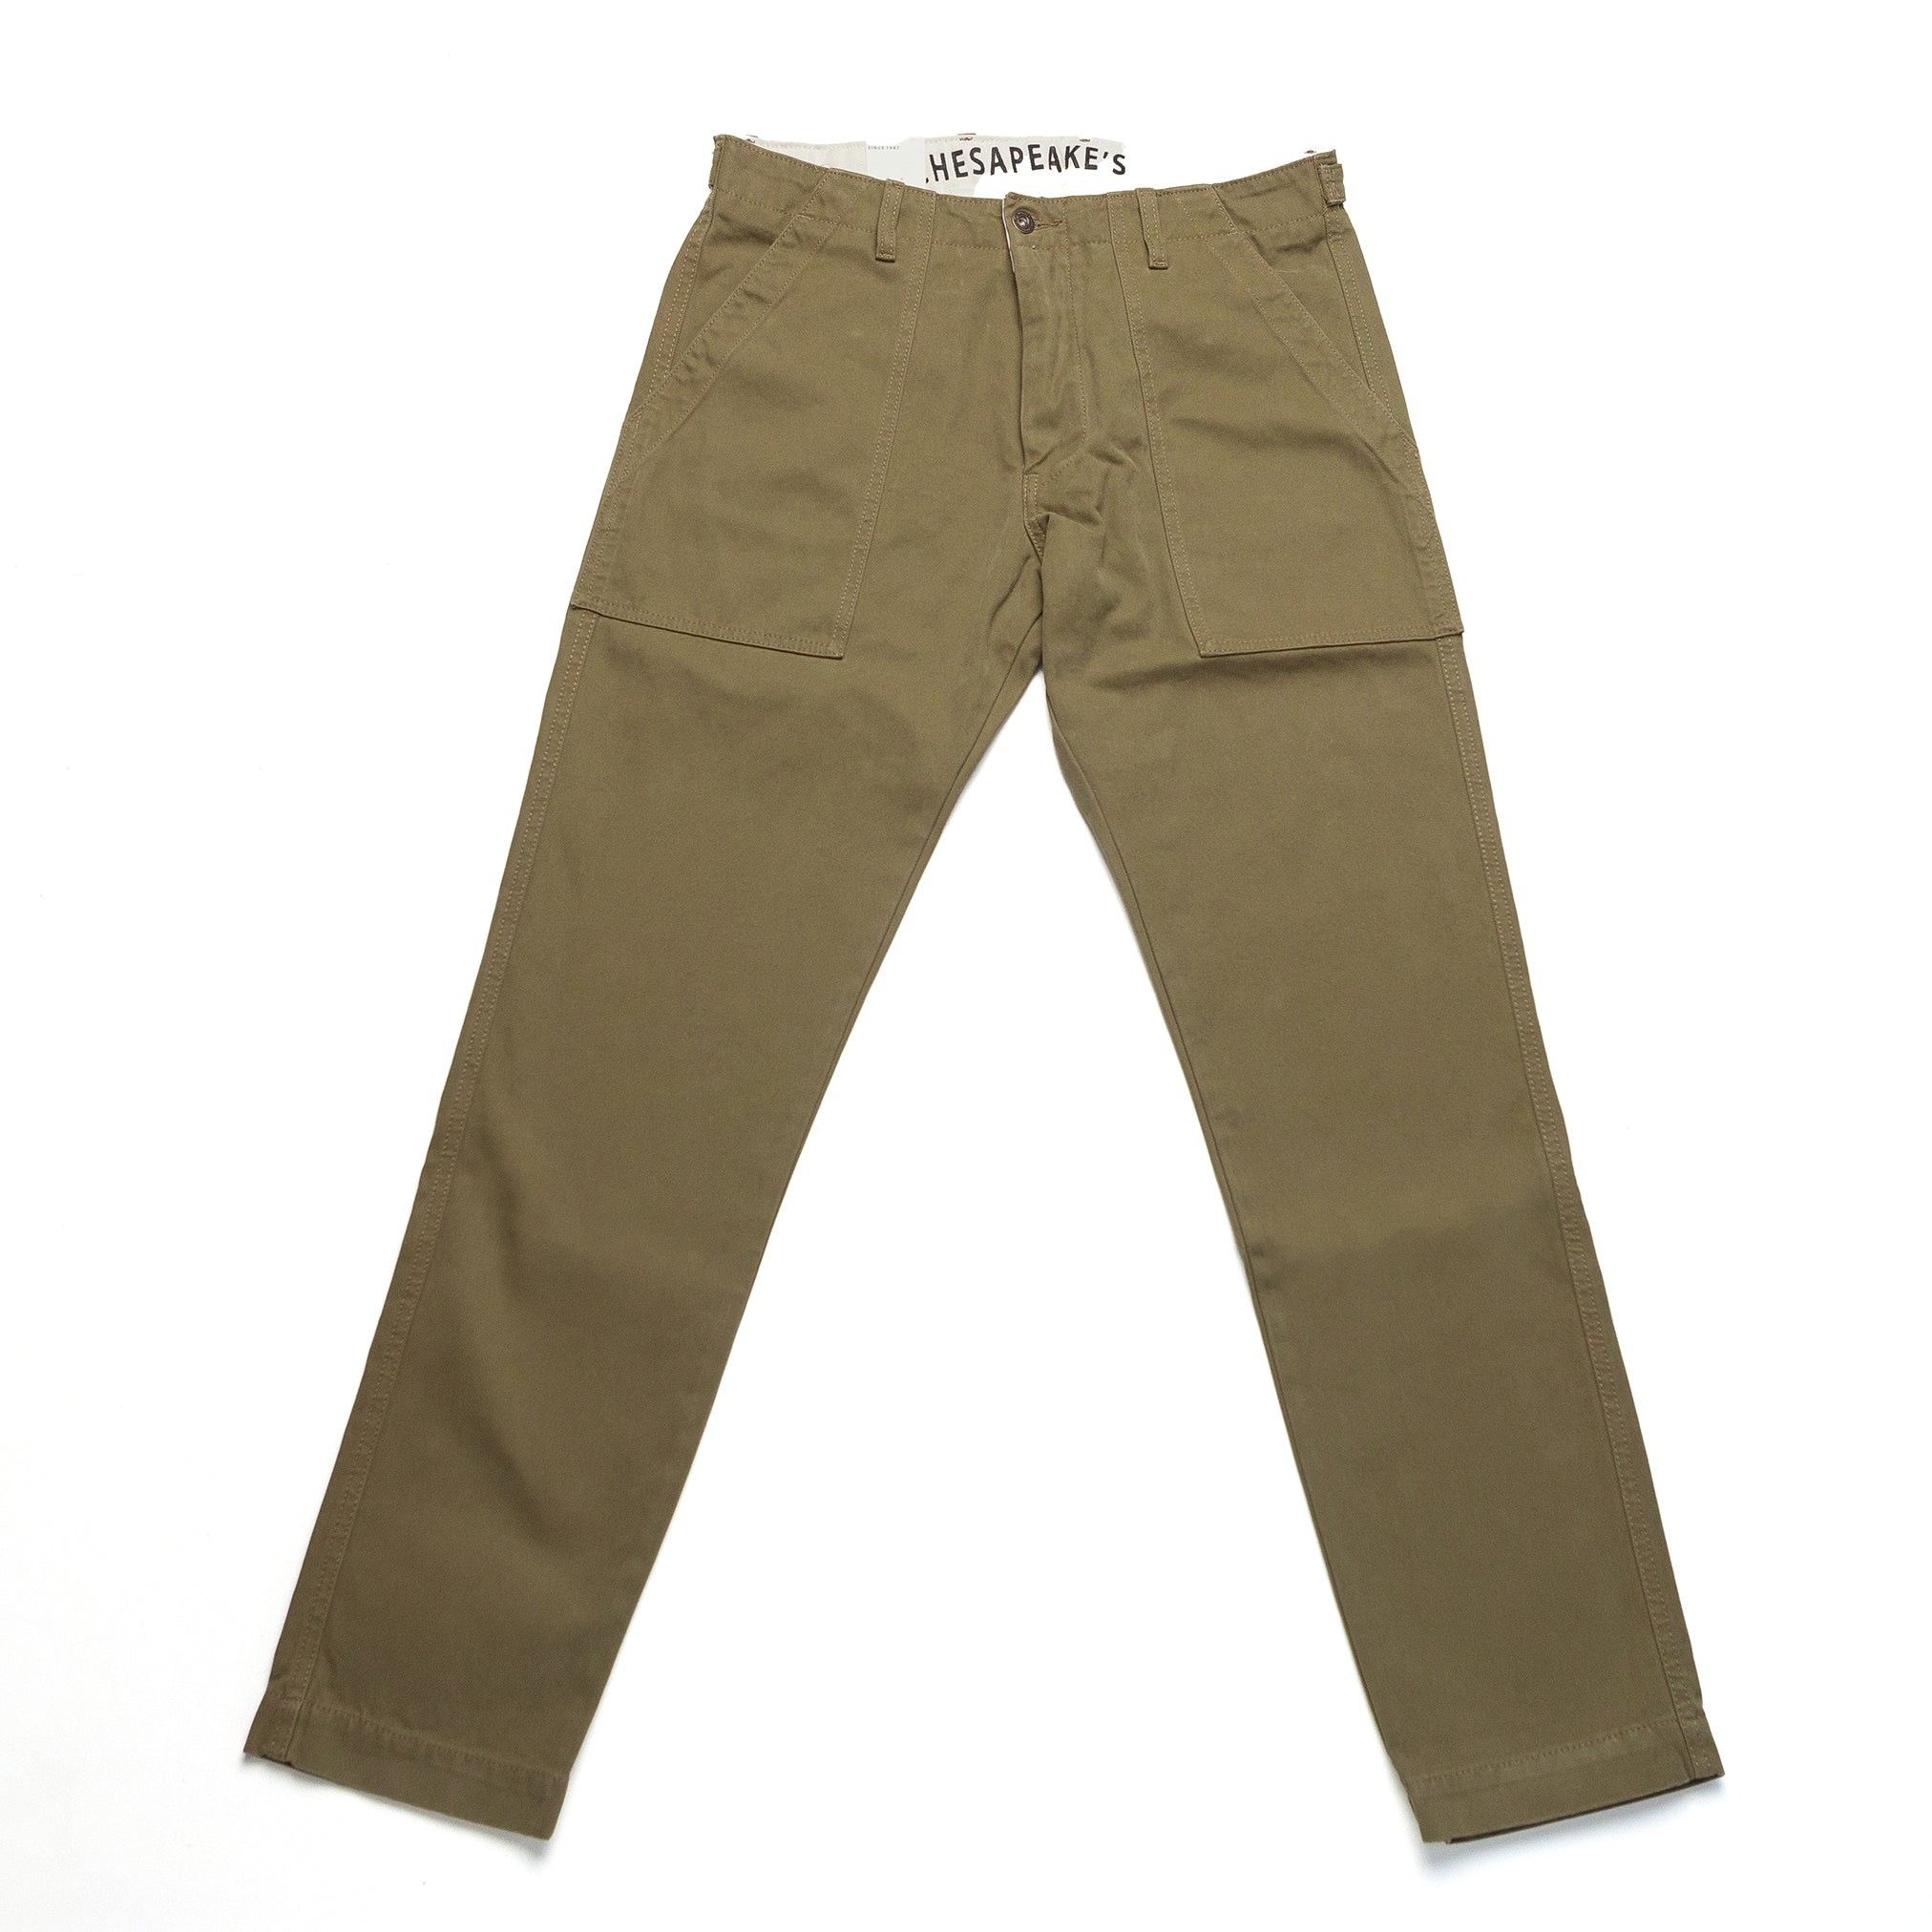 Degrasse Canvas Fatigues in Khaki Green